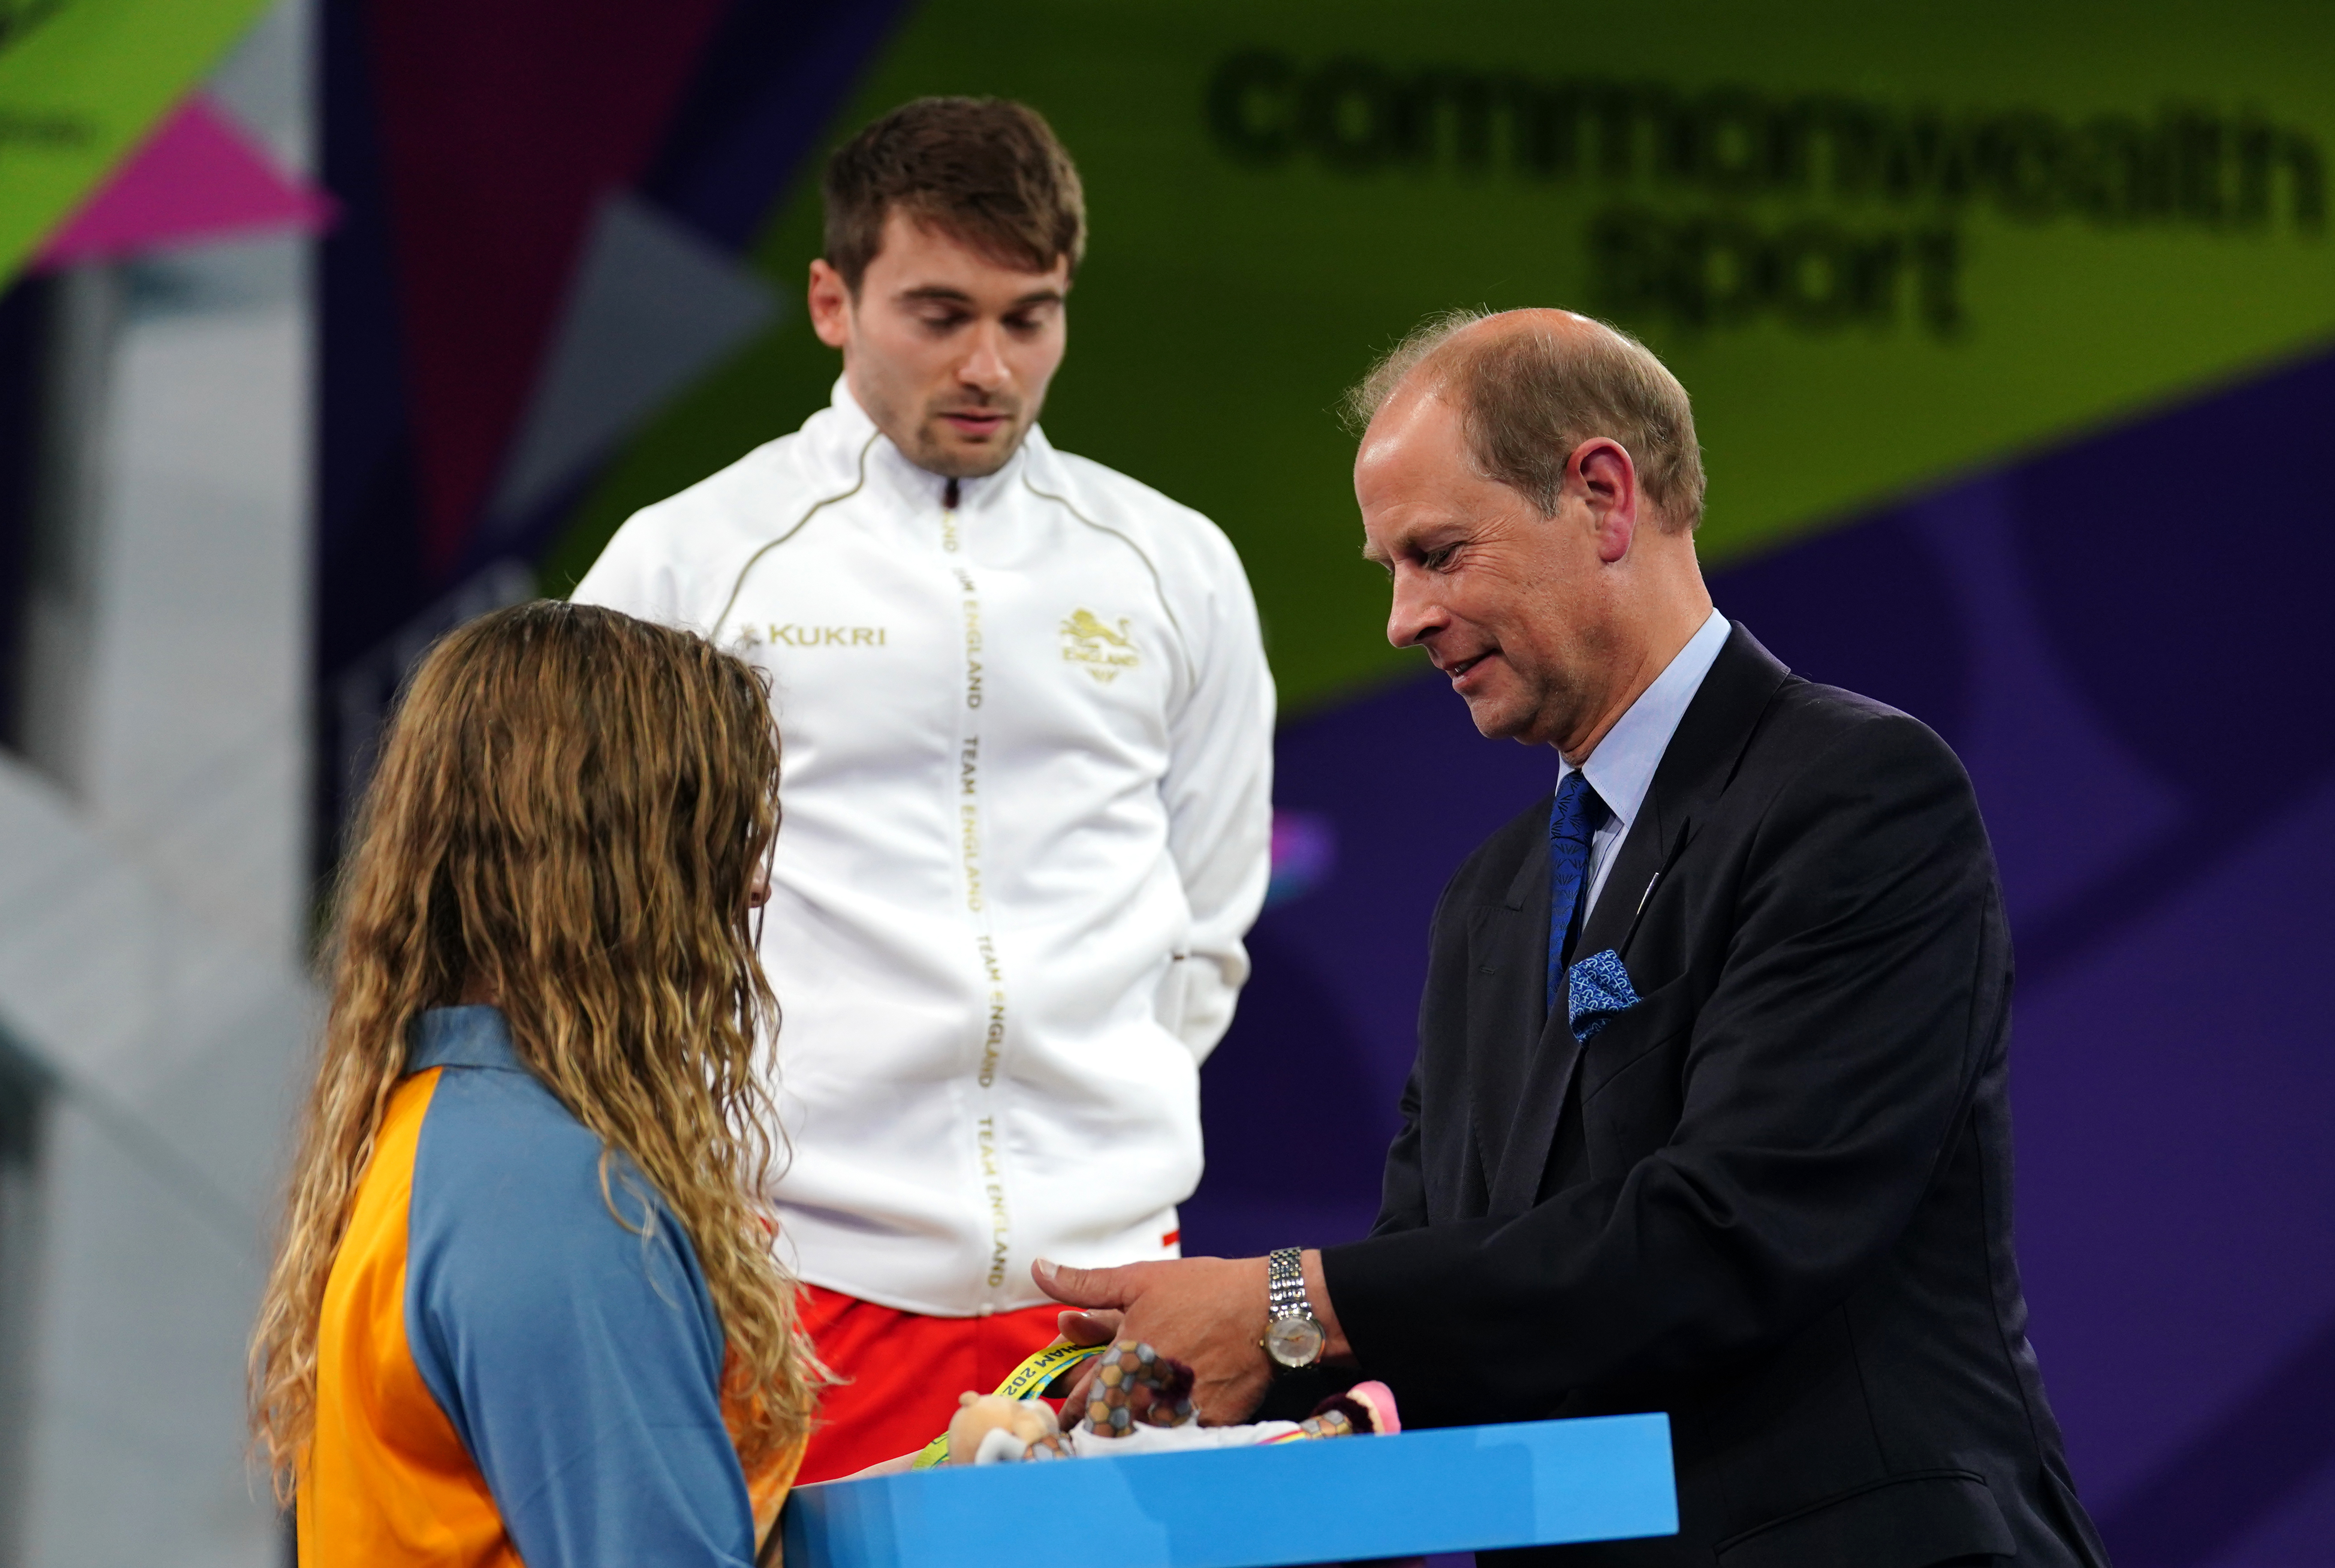 The Earl of Wessex presents a Gold Medal to Daniel Goodfellow